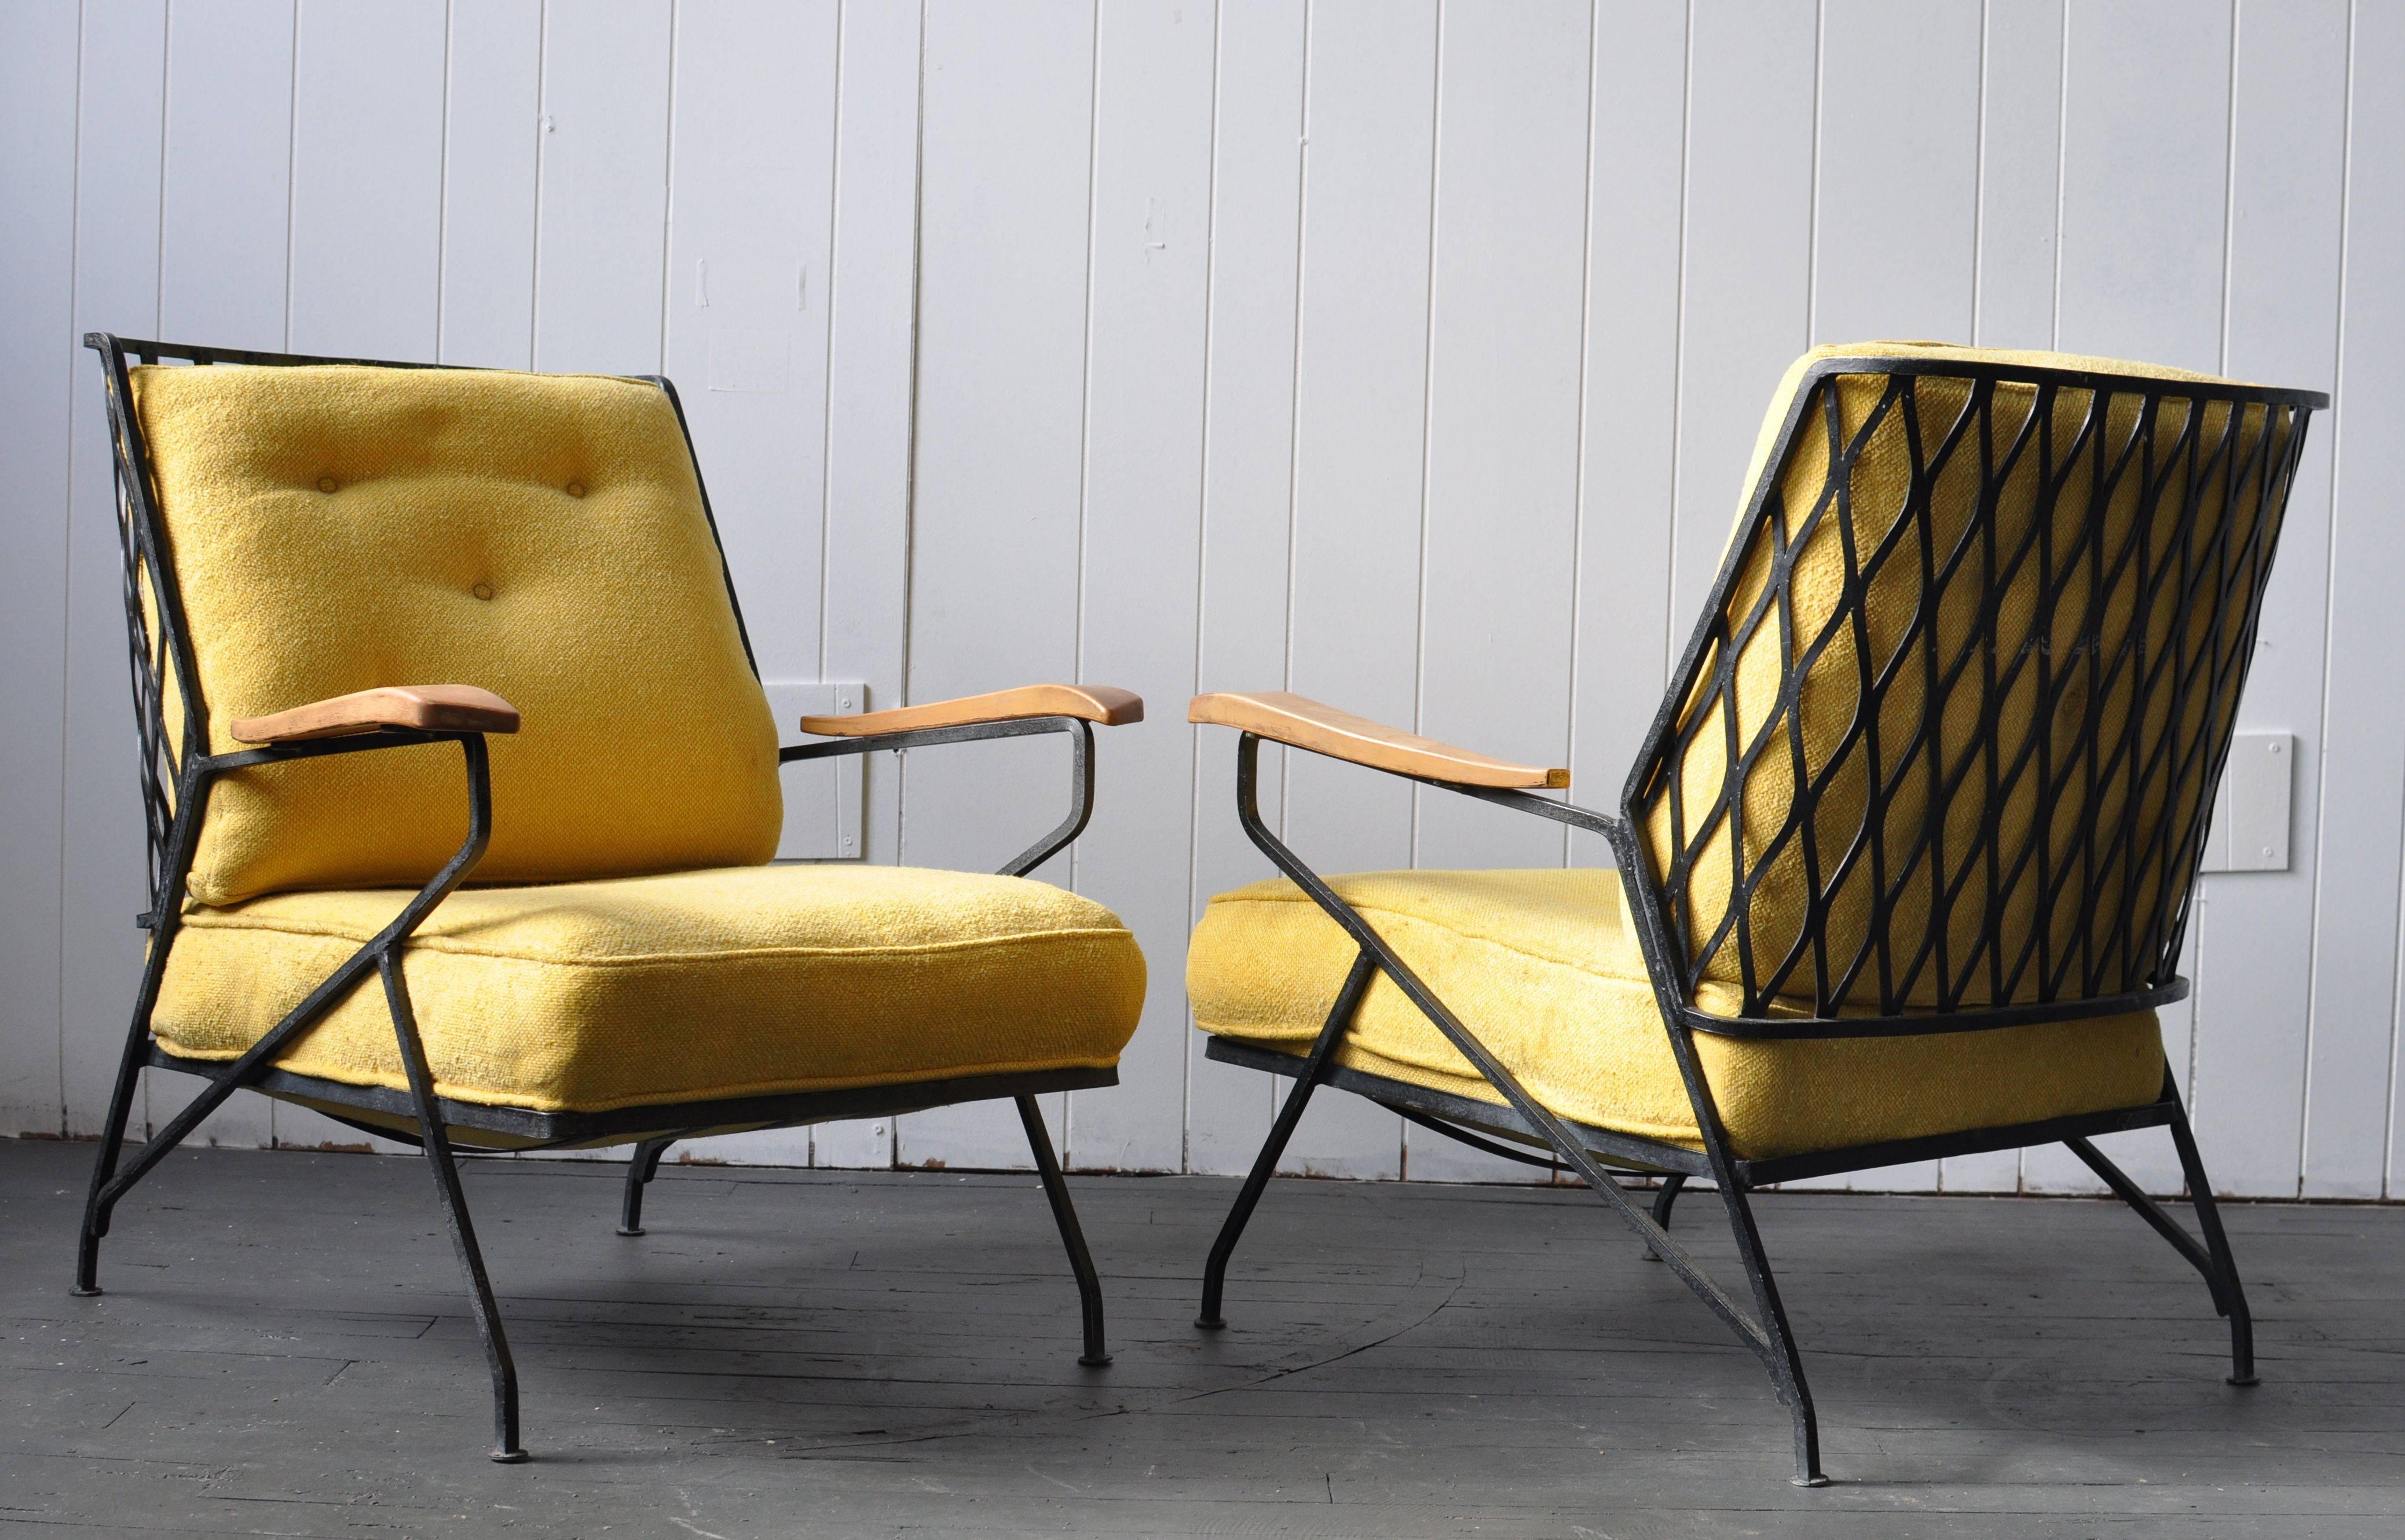 Rare pair of Salterini lounge chairs.

Please inquire for trade pricing.